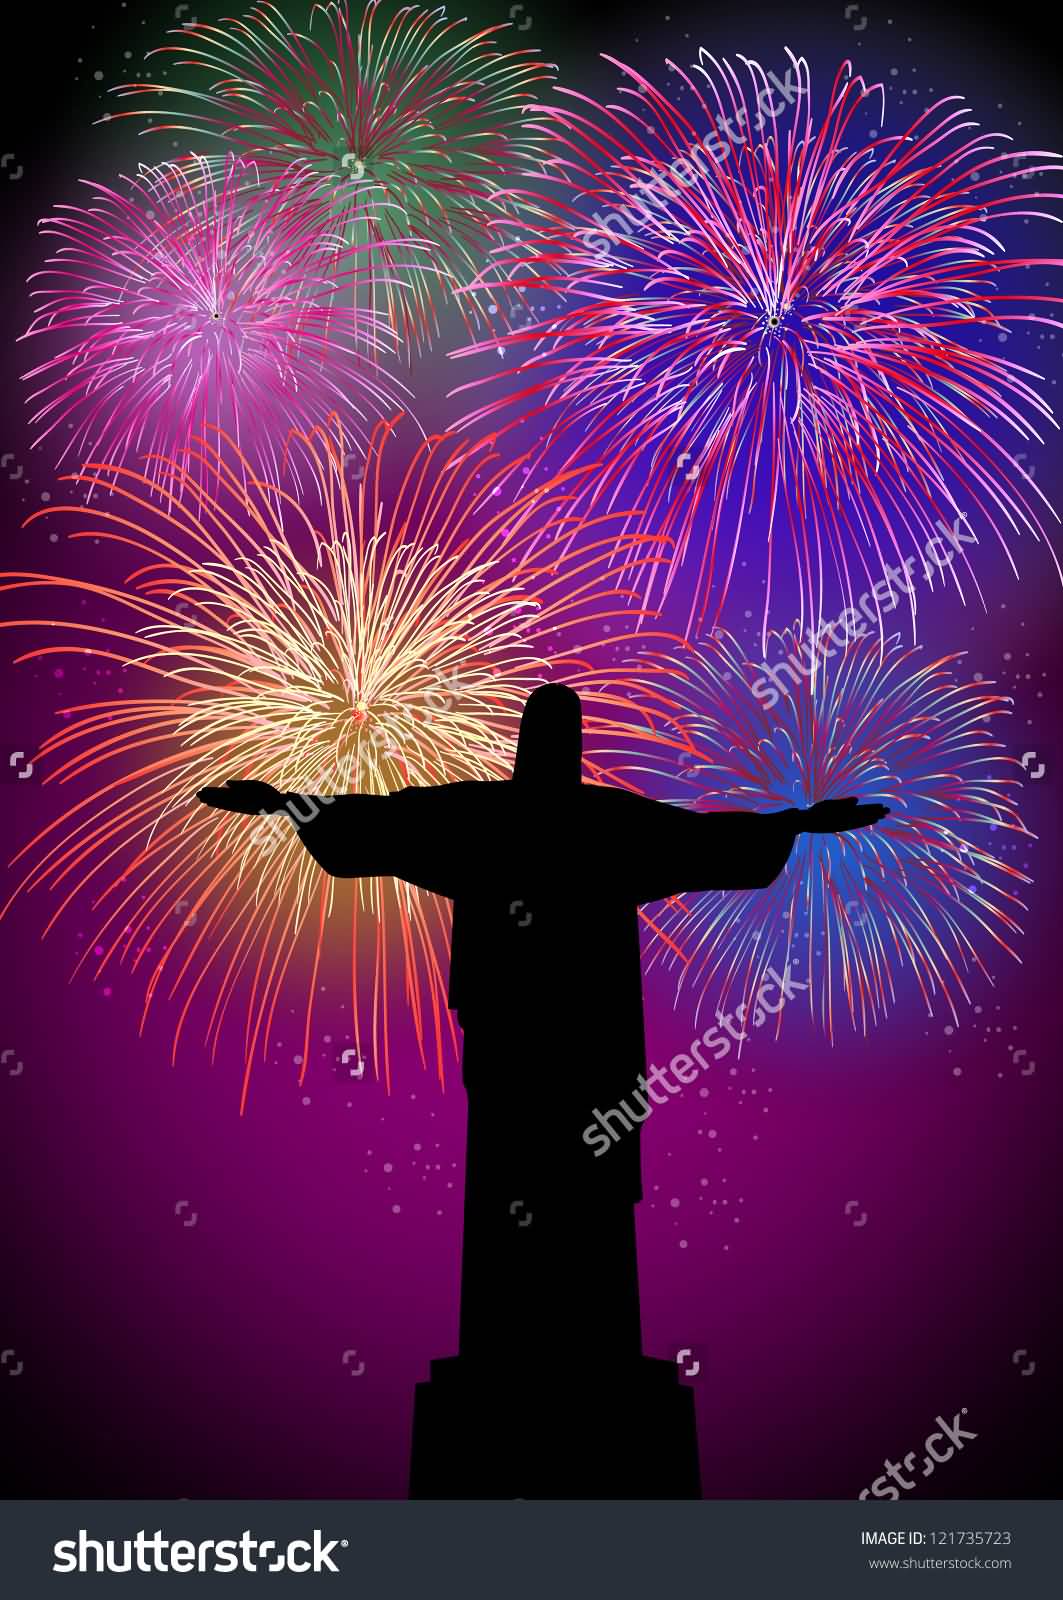 Fireworks Behind The Silhouette Christ the Redeemer Statue